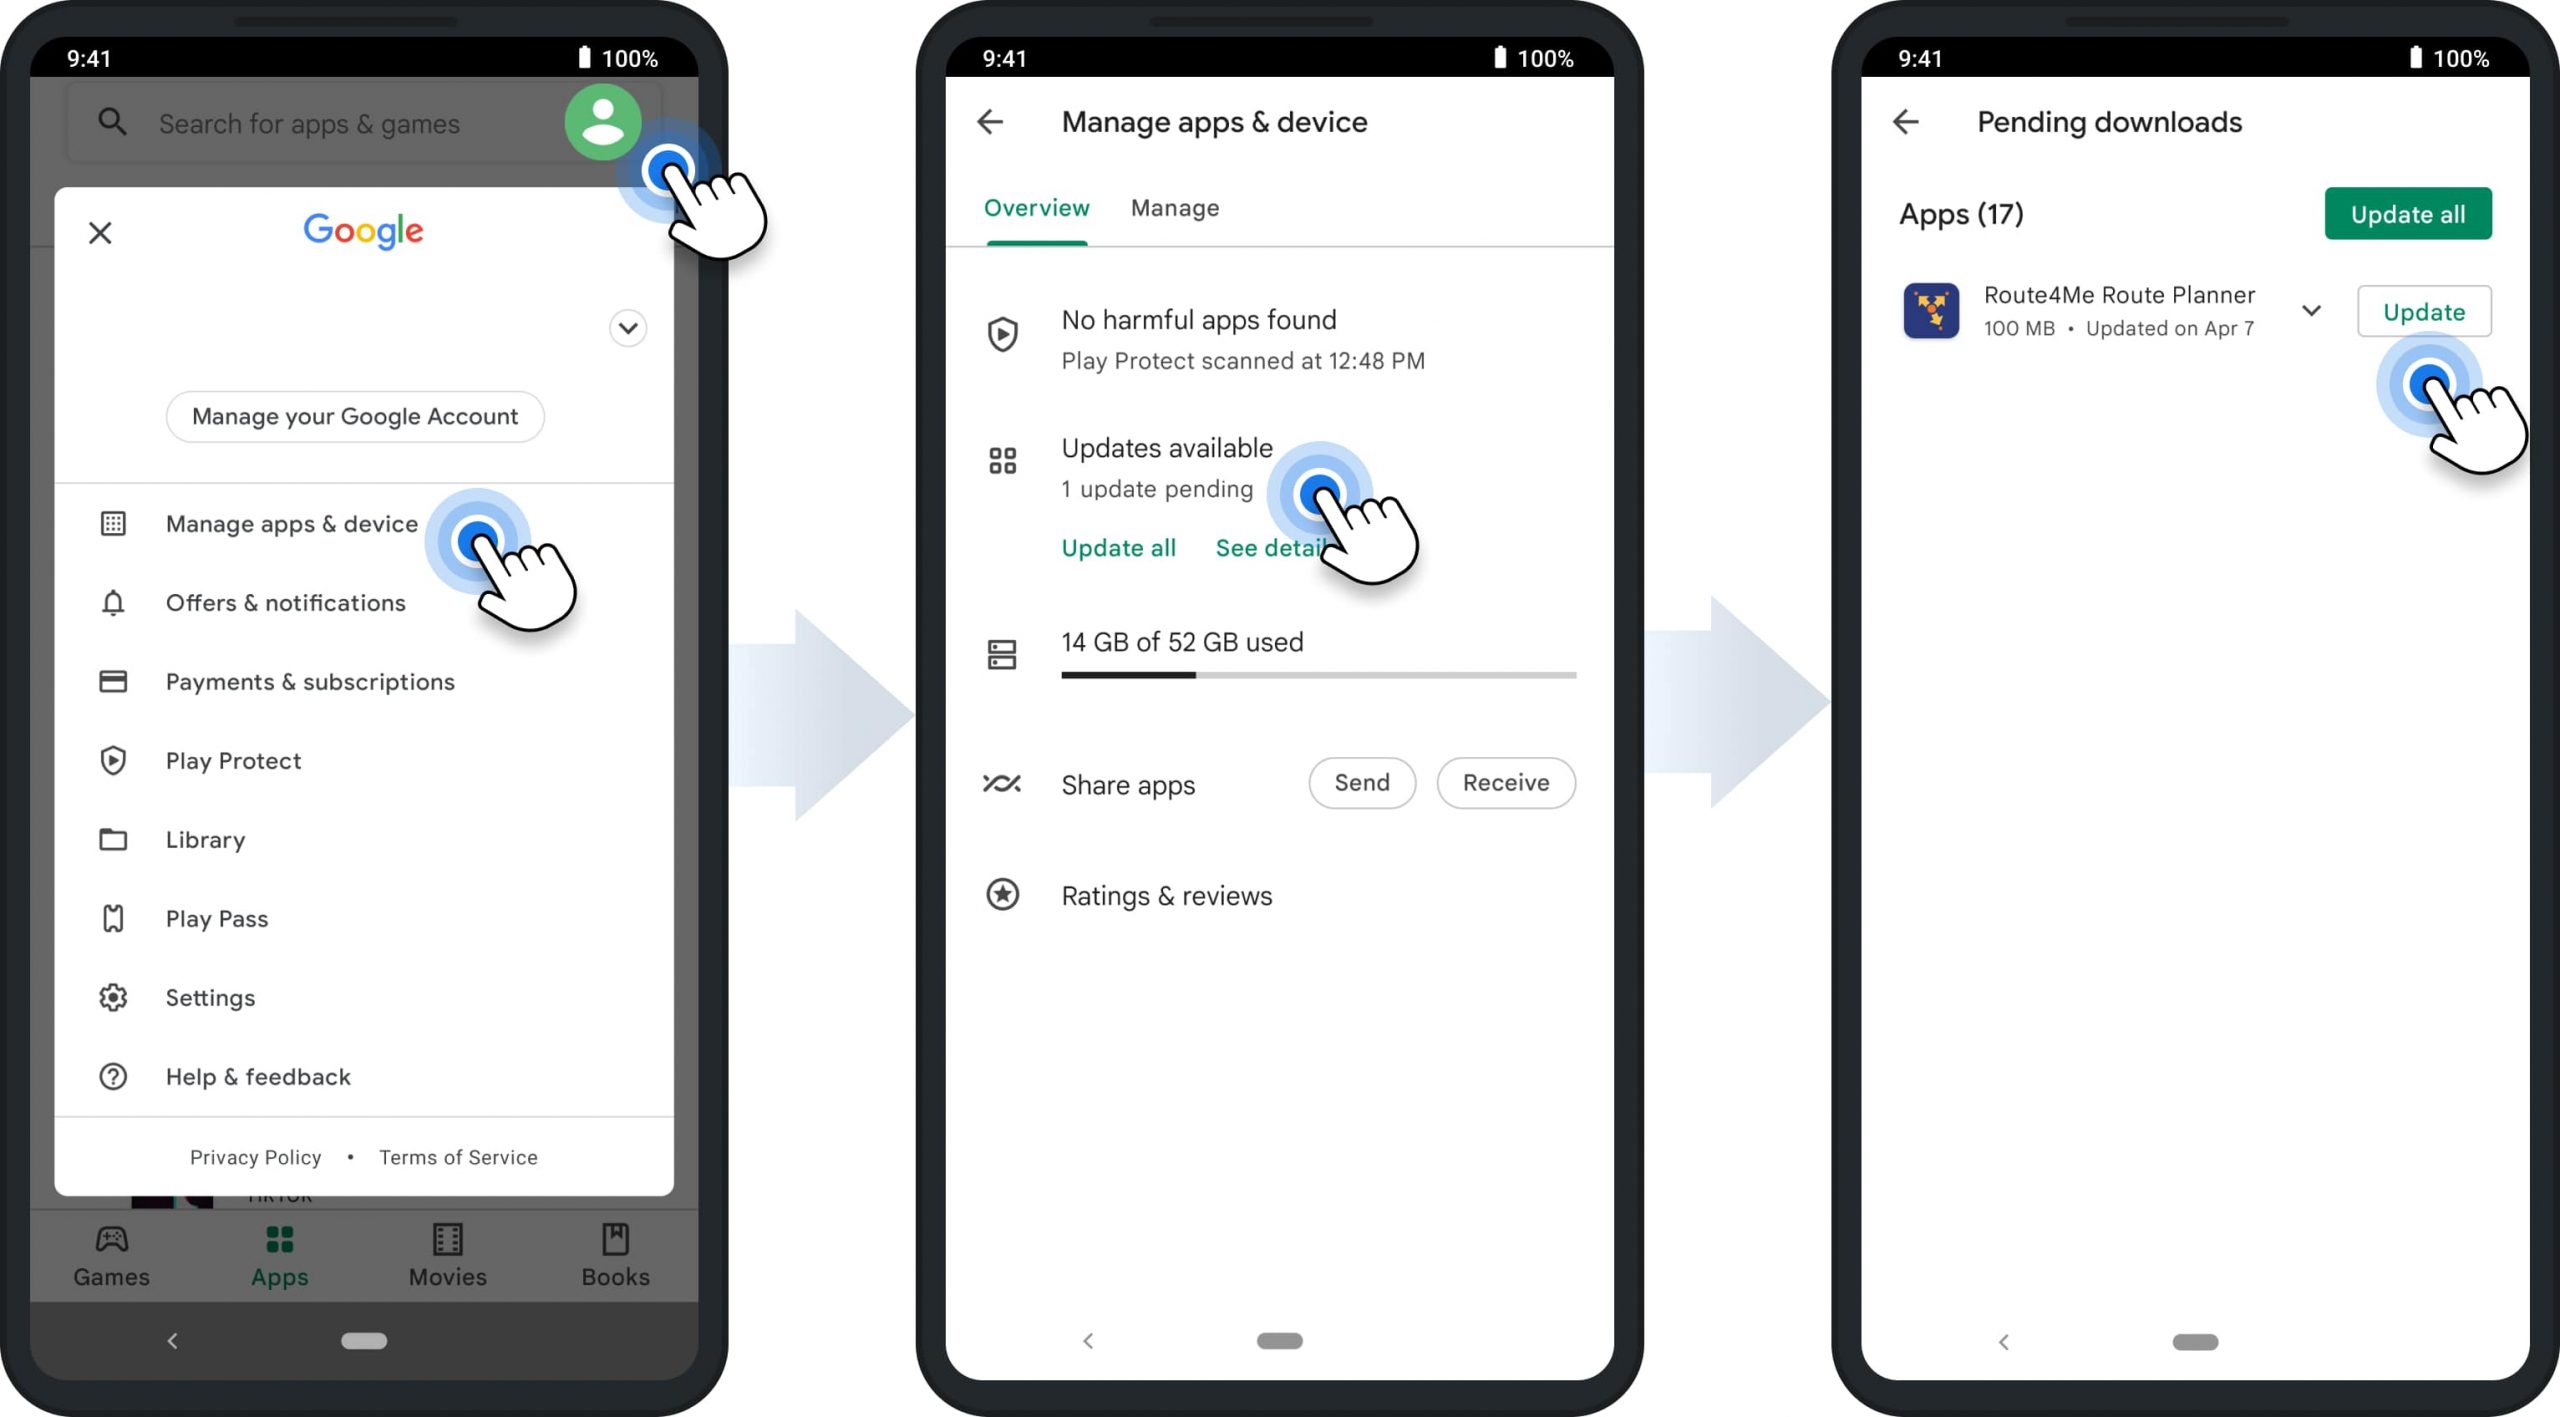 Manage apps on your Android device and install the latest Route4Me Route Planner app updates.